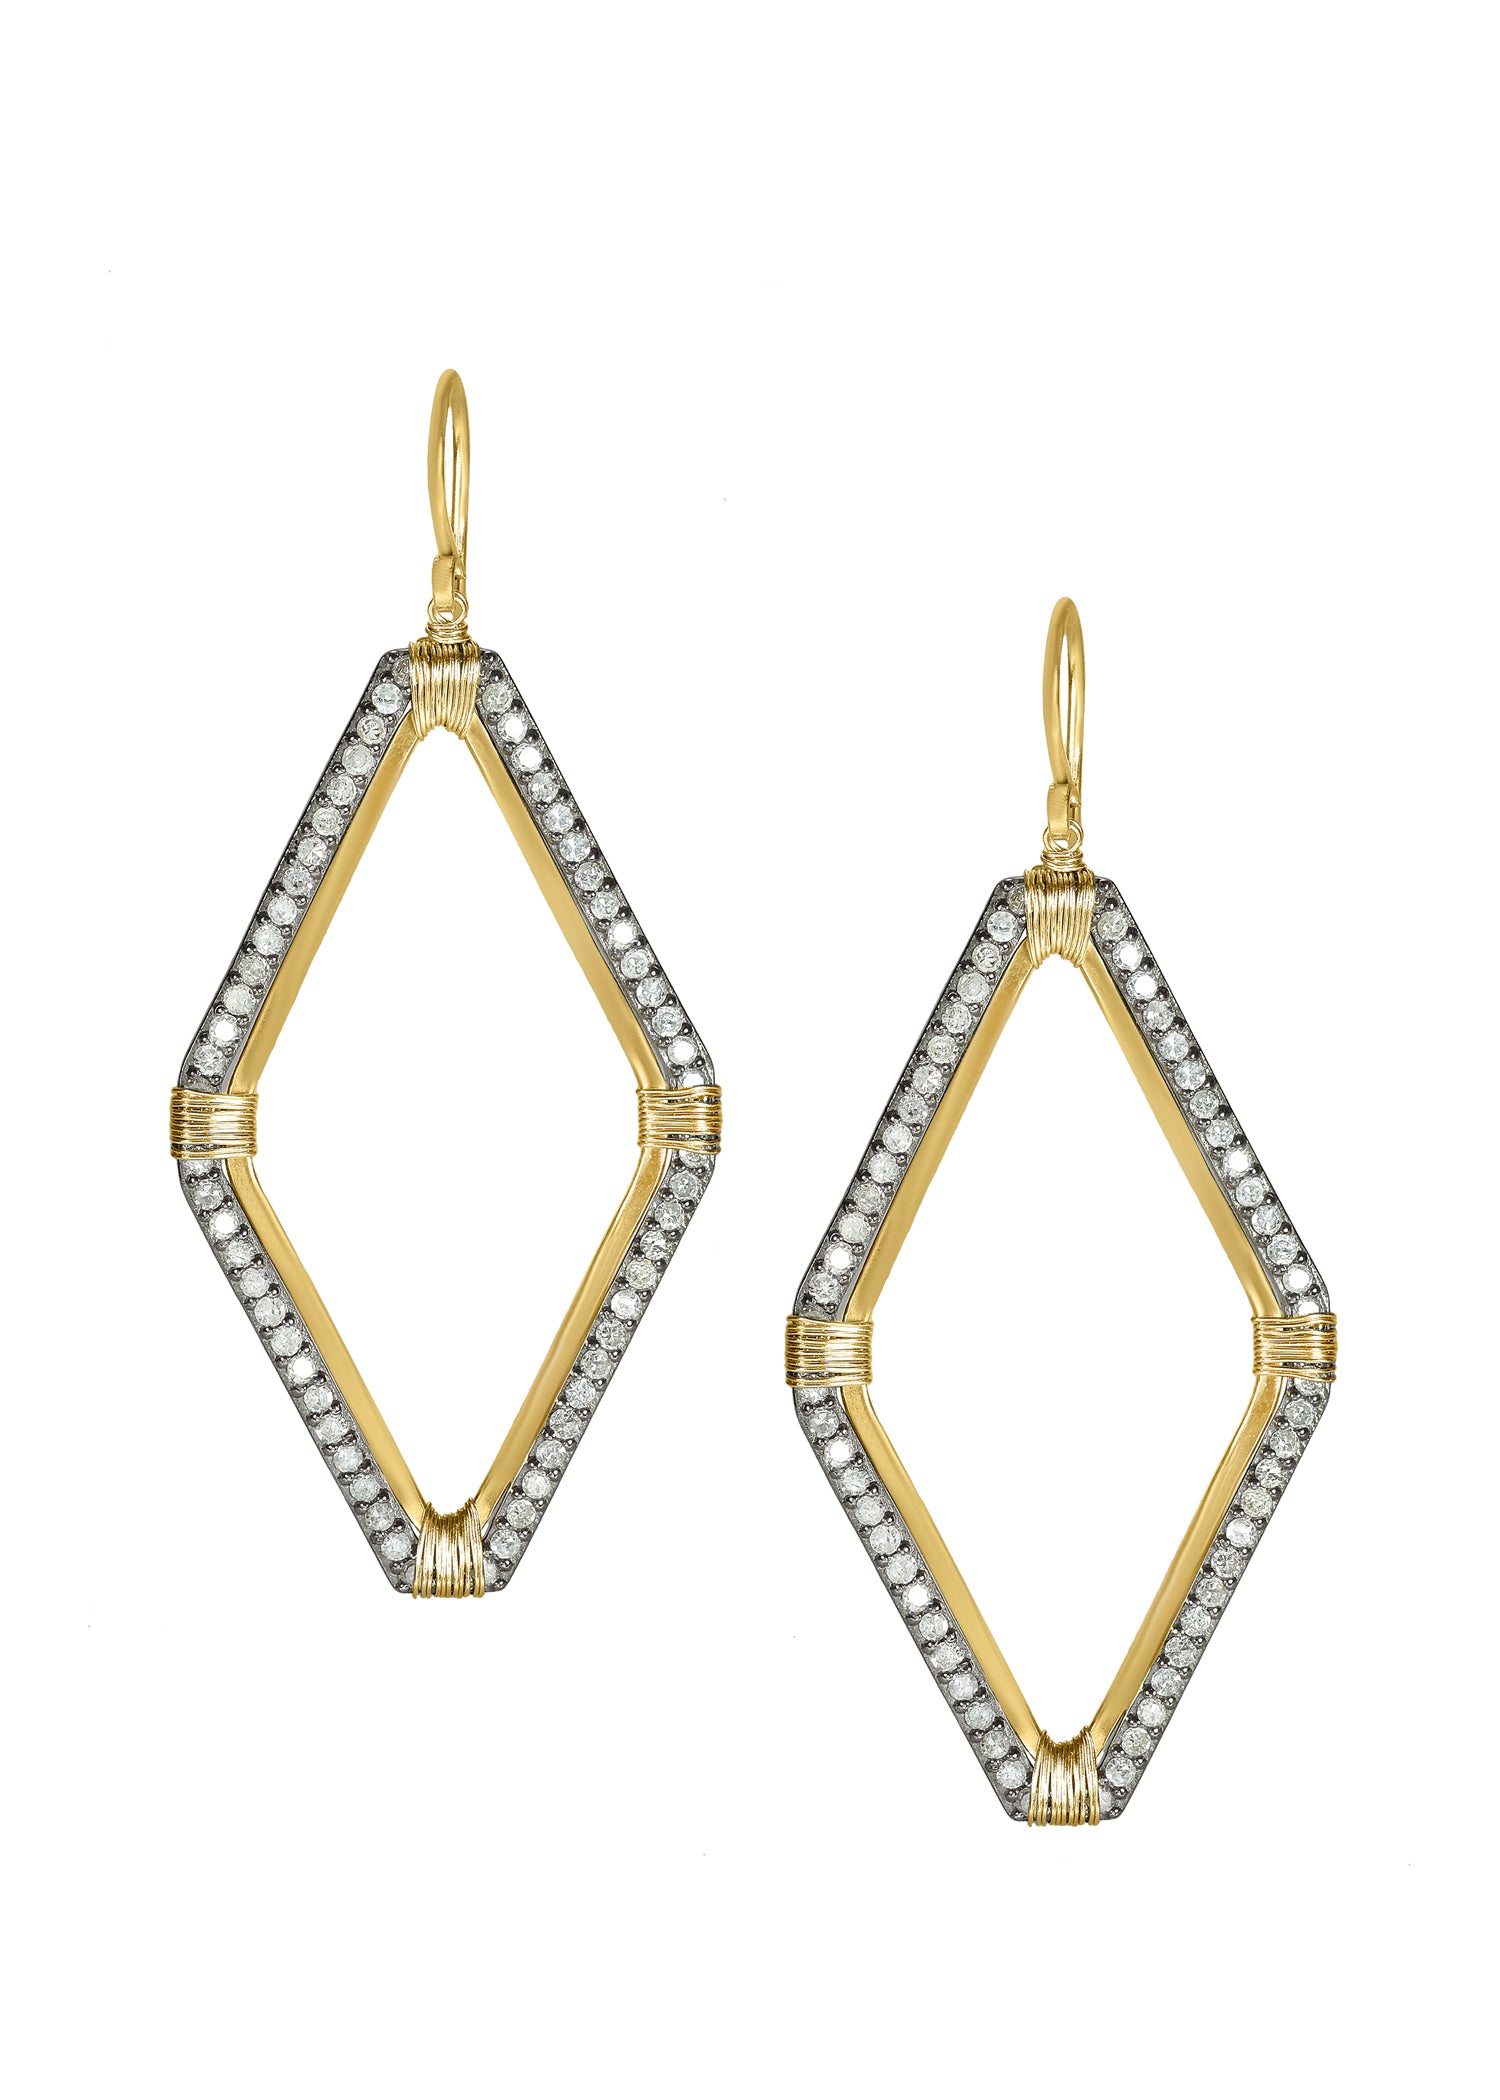 Diamond 14k gold Sterling silver Mixed metal Special order only Earrings measure 2-1/8" in length (including the ear wires) and 1" in width Handmade in our Los Angeles studio